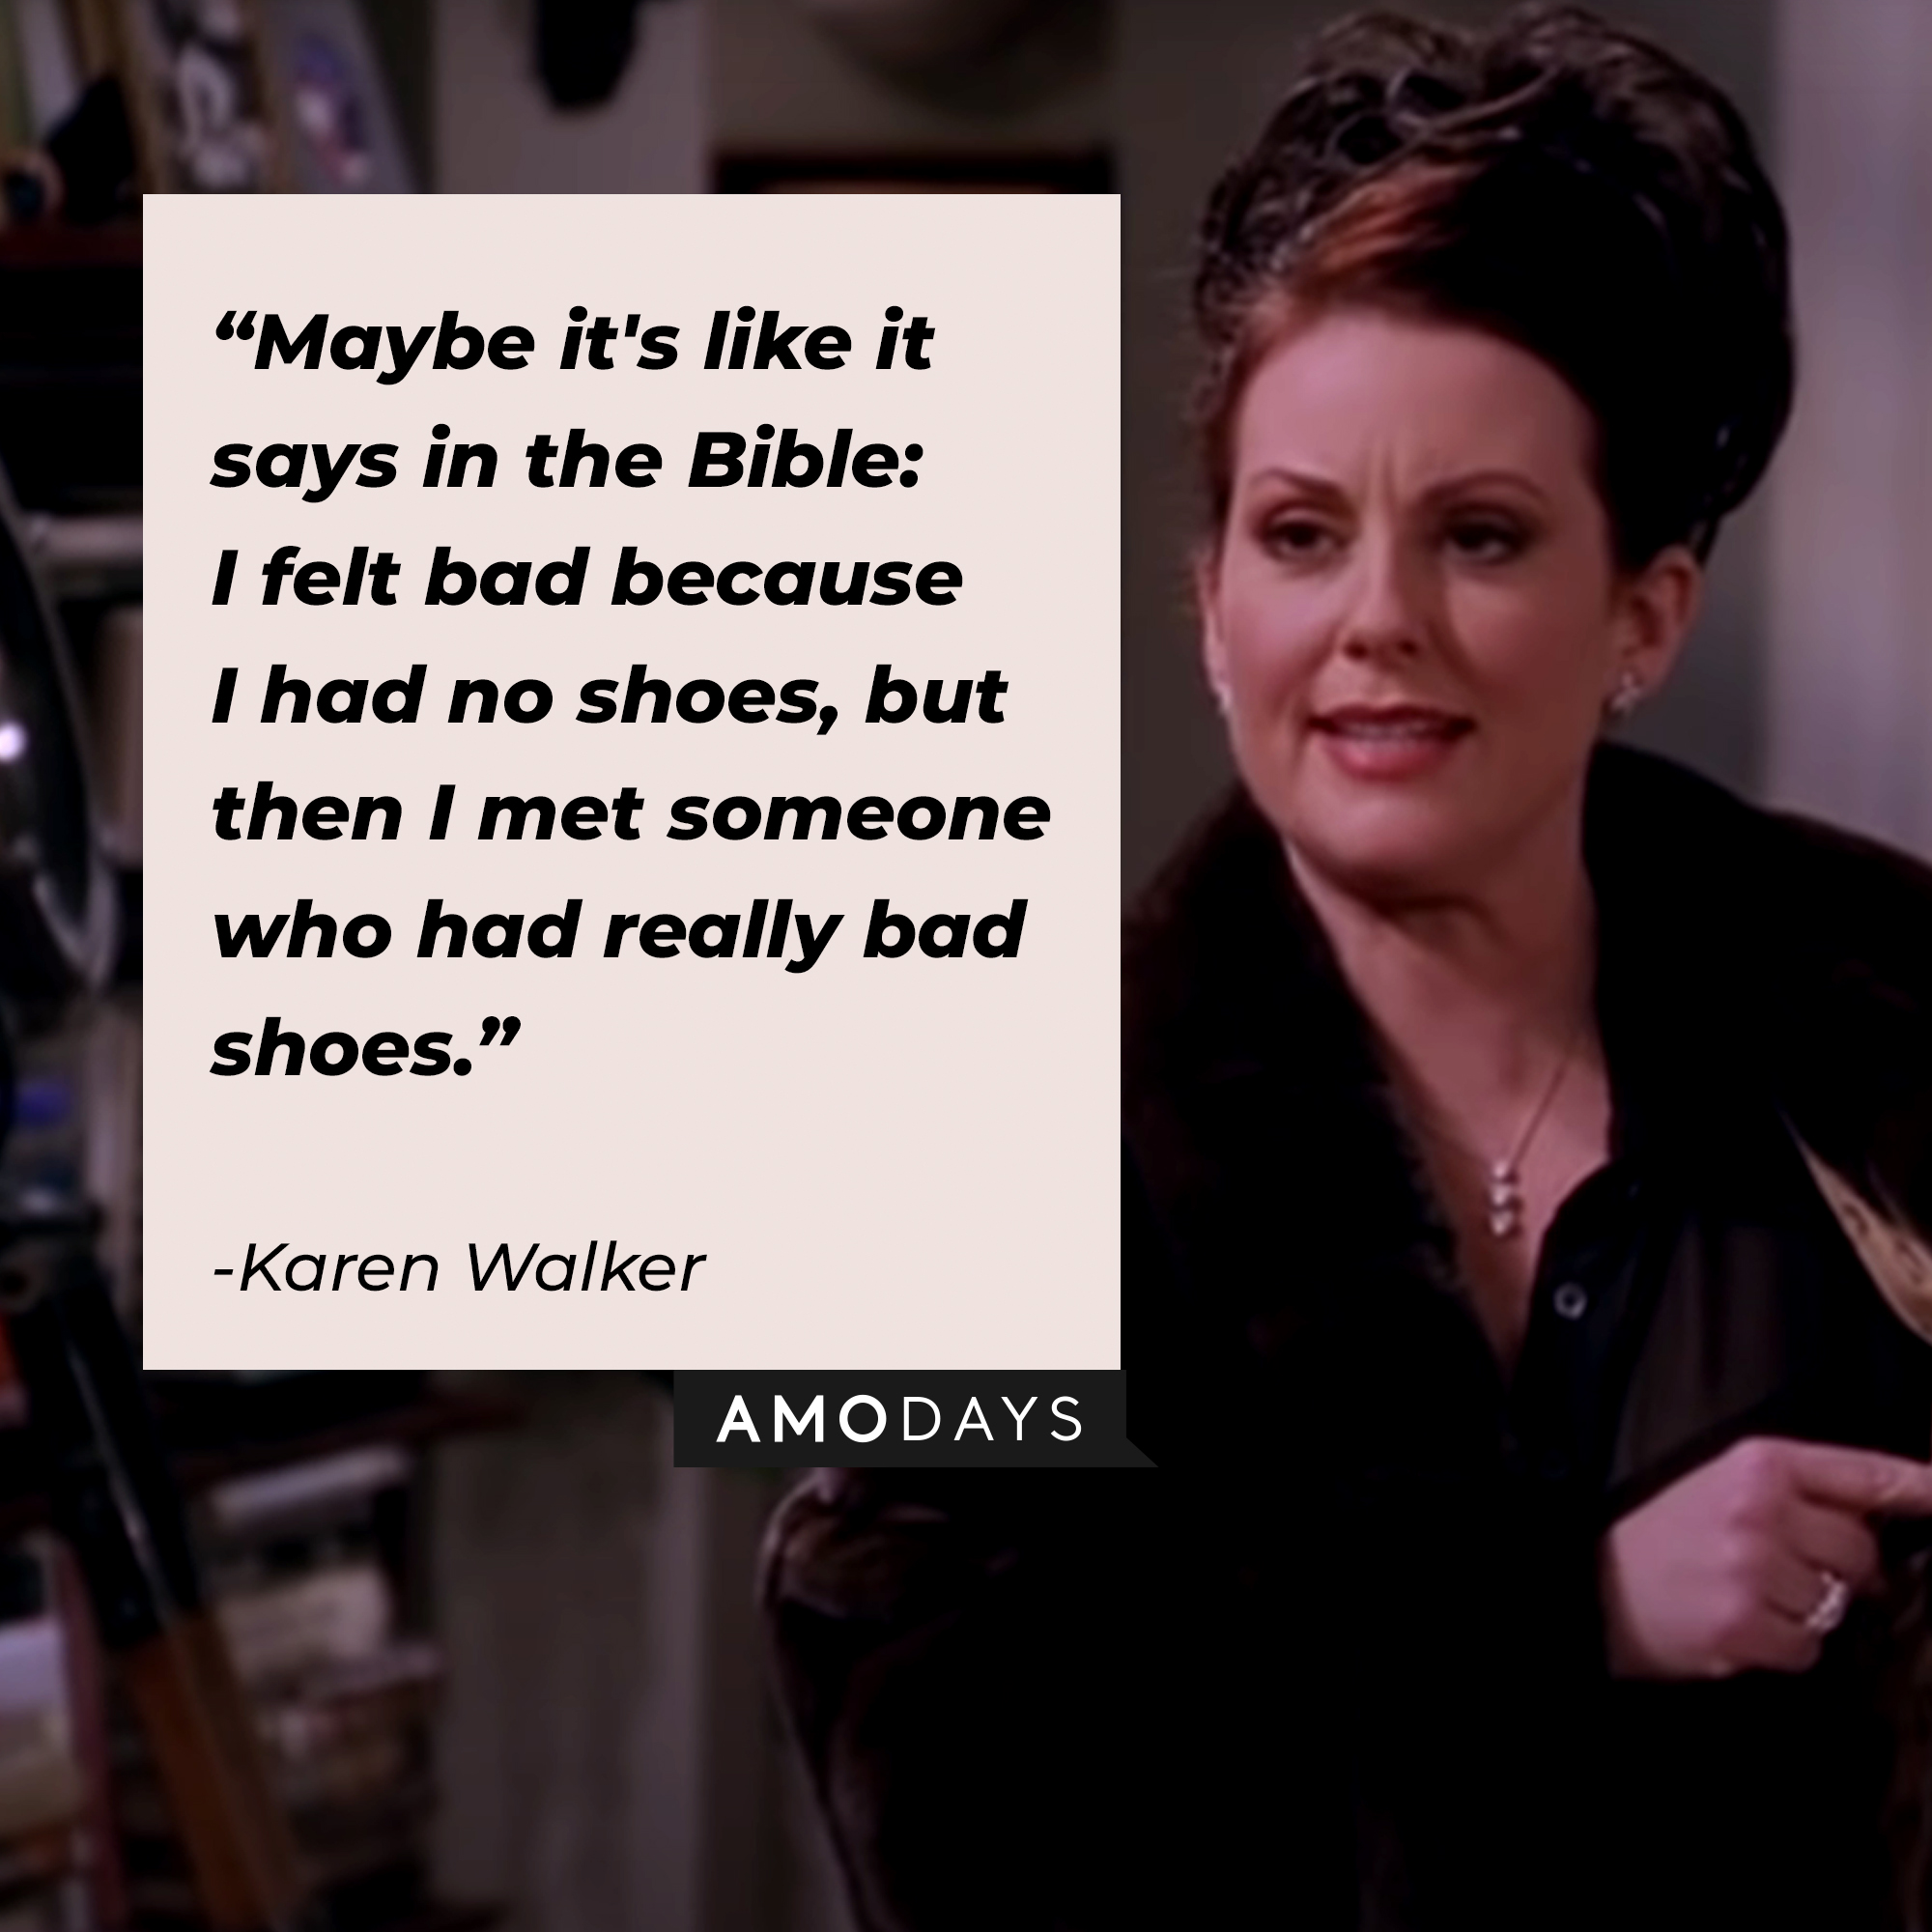 A photo of Karen Walker with the quote, "Maybe it's like it says in the Bible: I felt bad because I had no shoes, but then I met someone who had really bad shoes." | Source: YouTube/ComedyBites